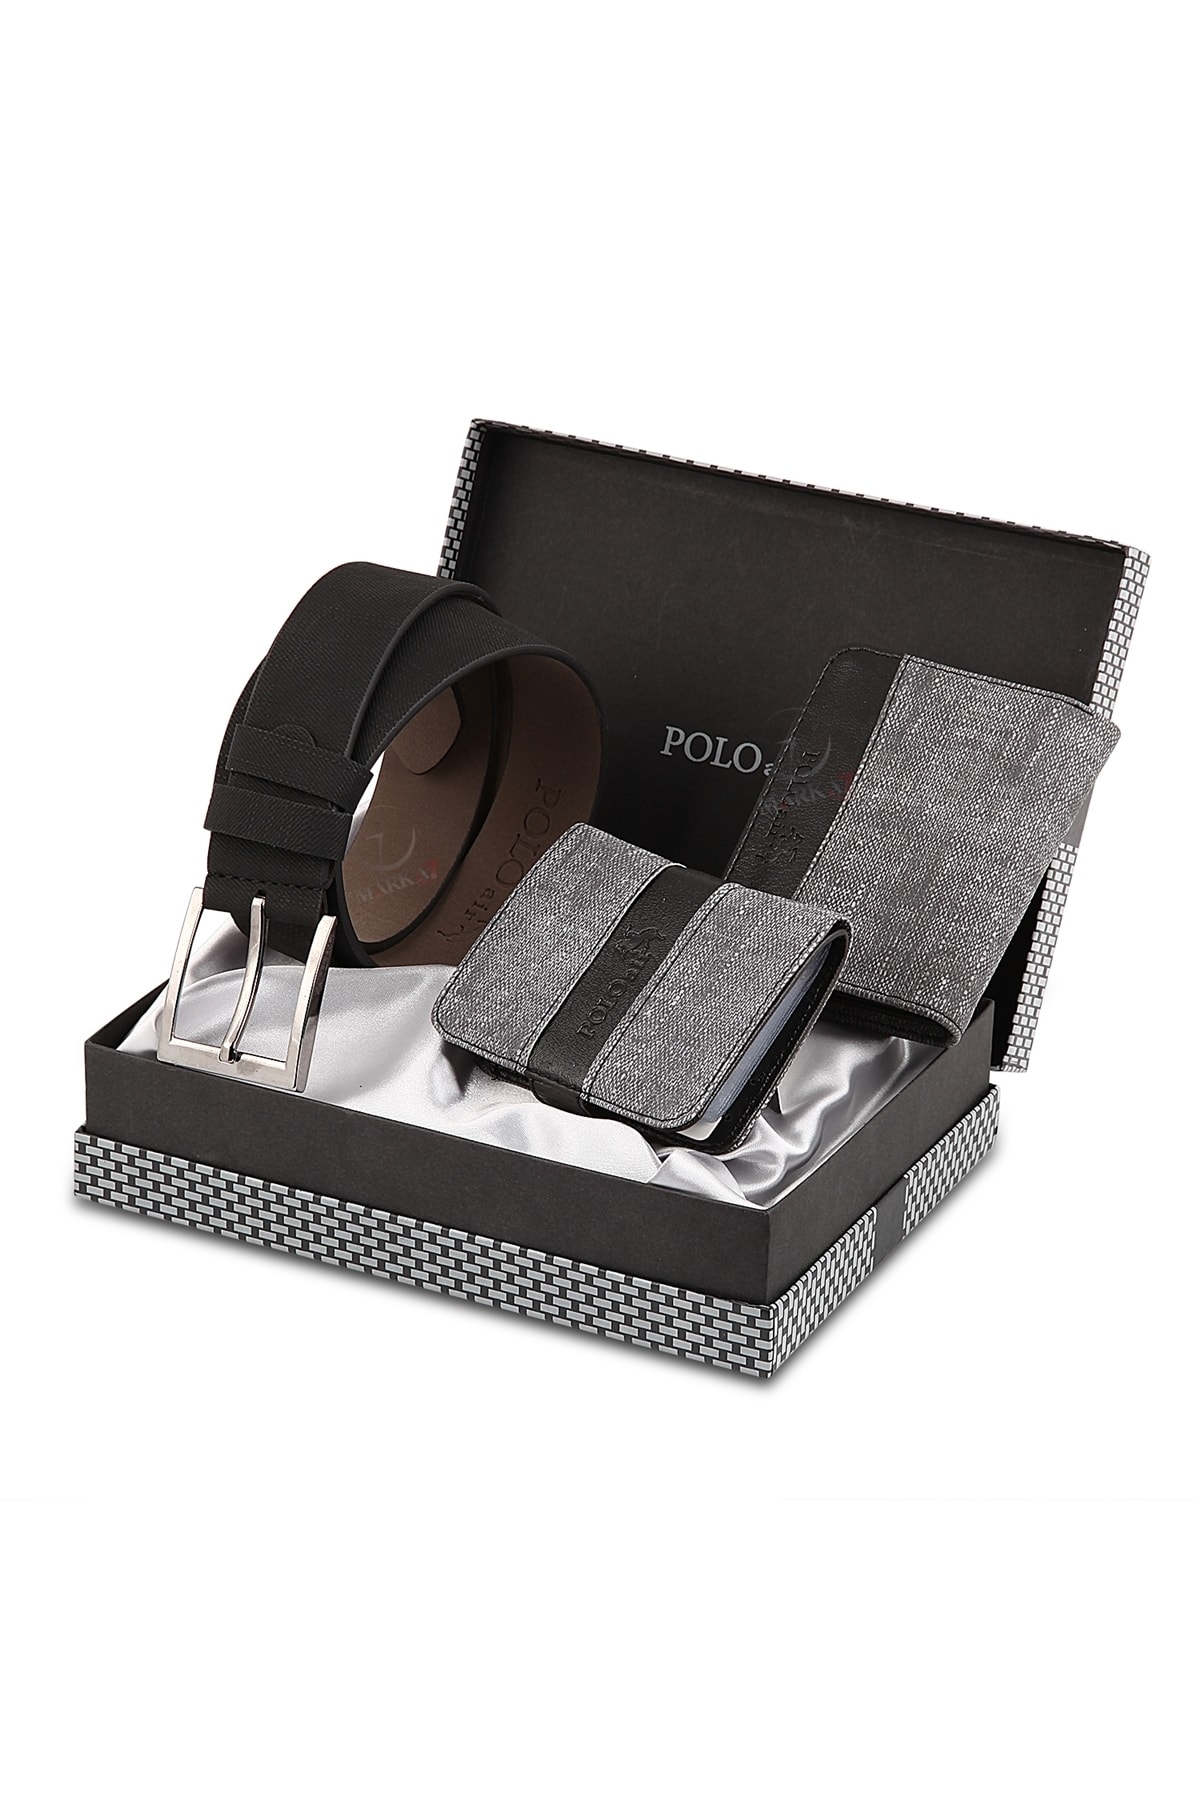 Polo Air Boxed Sports Gray Men's Wallet Belt Card Holder Set